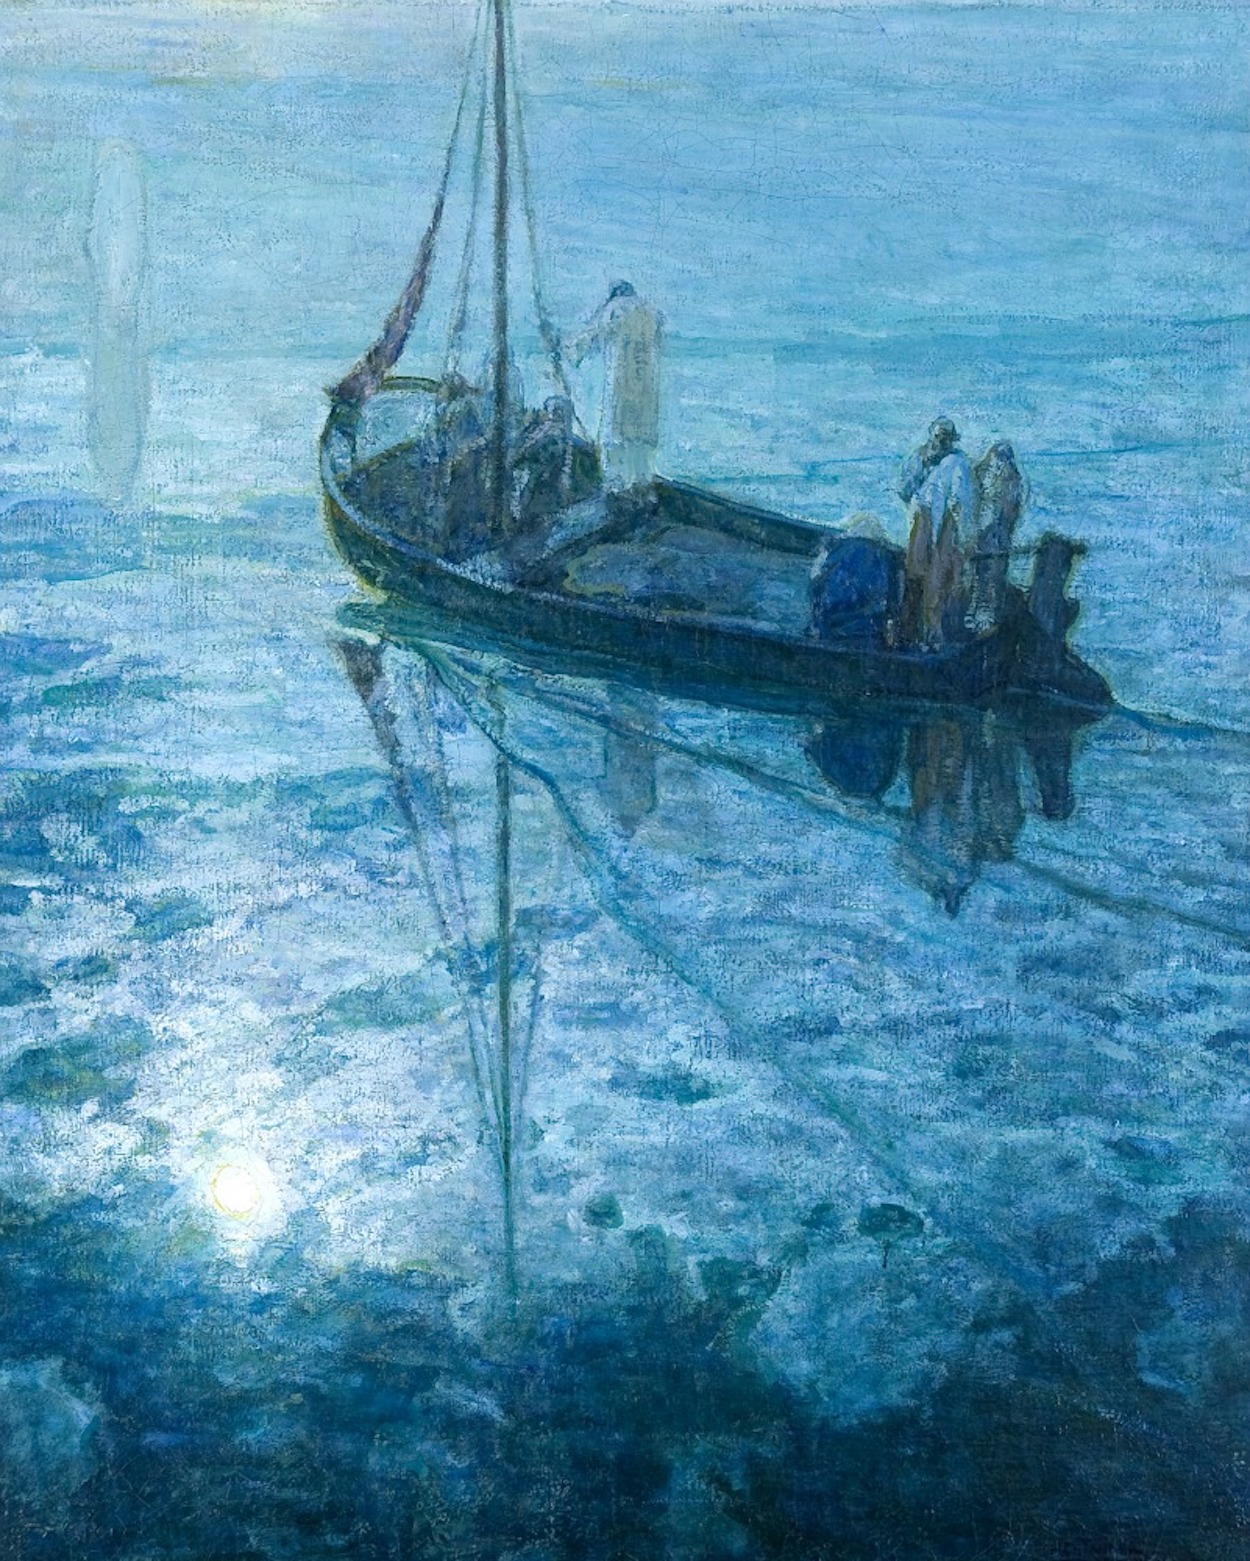 The Disciples See Christ Walking on the Water by Henry Ossawa Tanner - 1902-1912 - 126.4 × 101.3 cm Des Moines Art Center